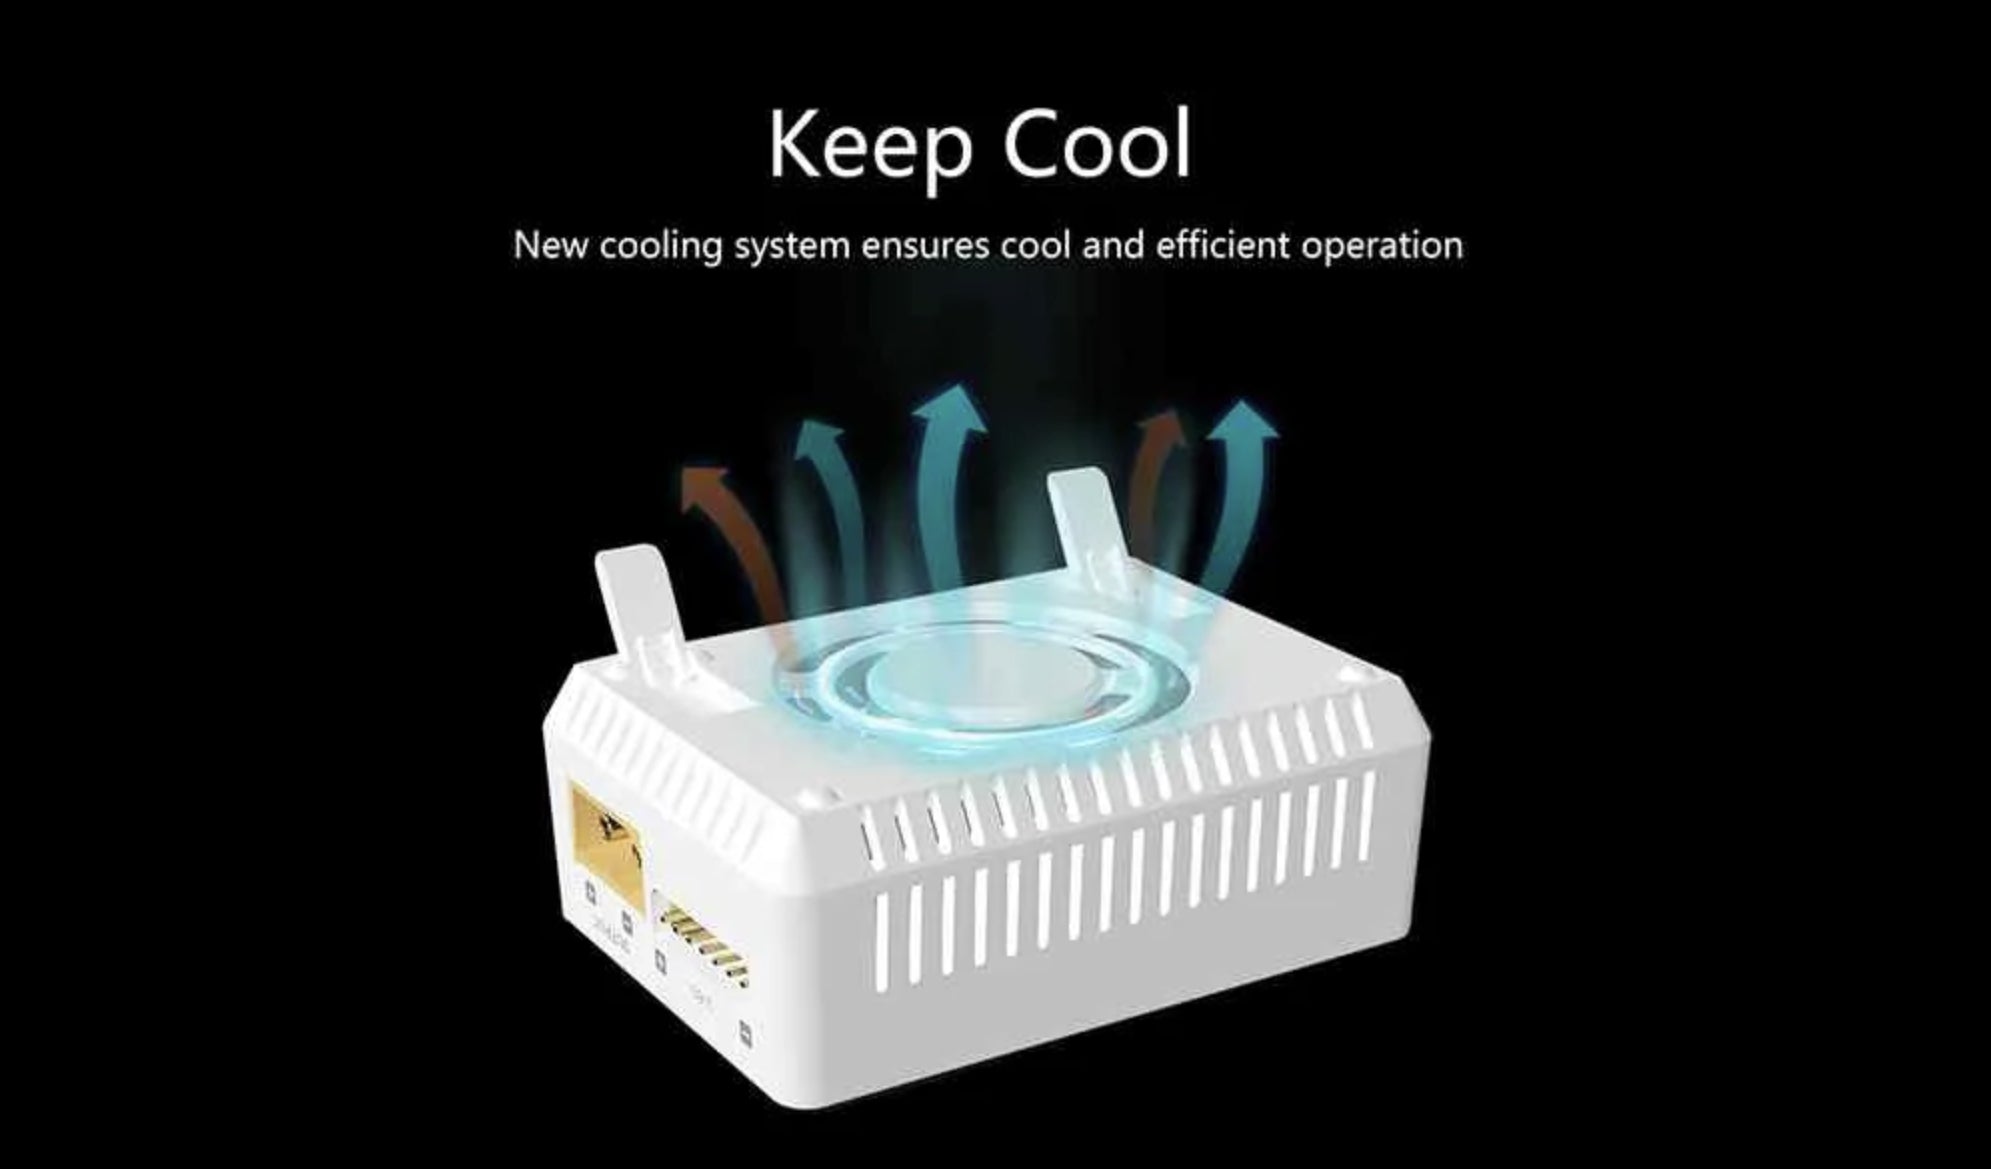 ToolkitRC M6 Charger, Keep Cool New cooling system ensures cool and efficient operation